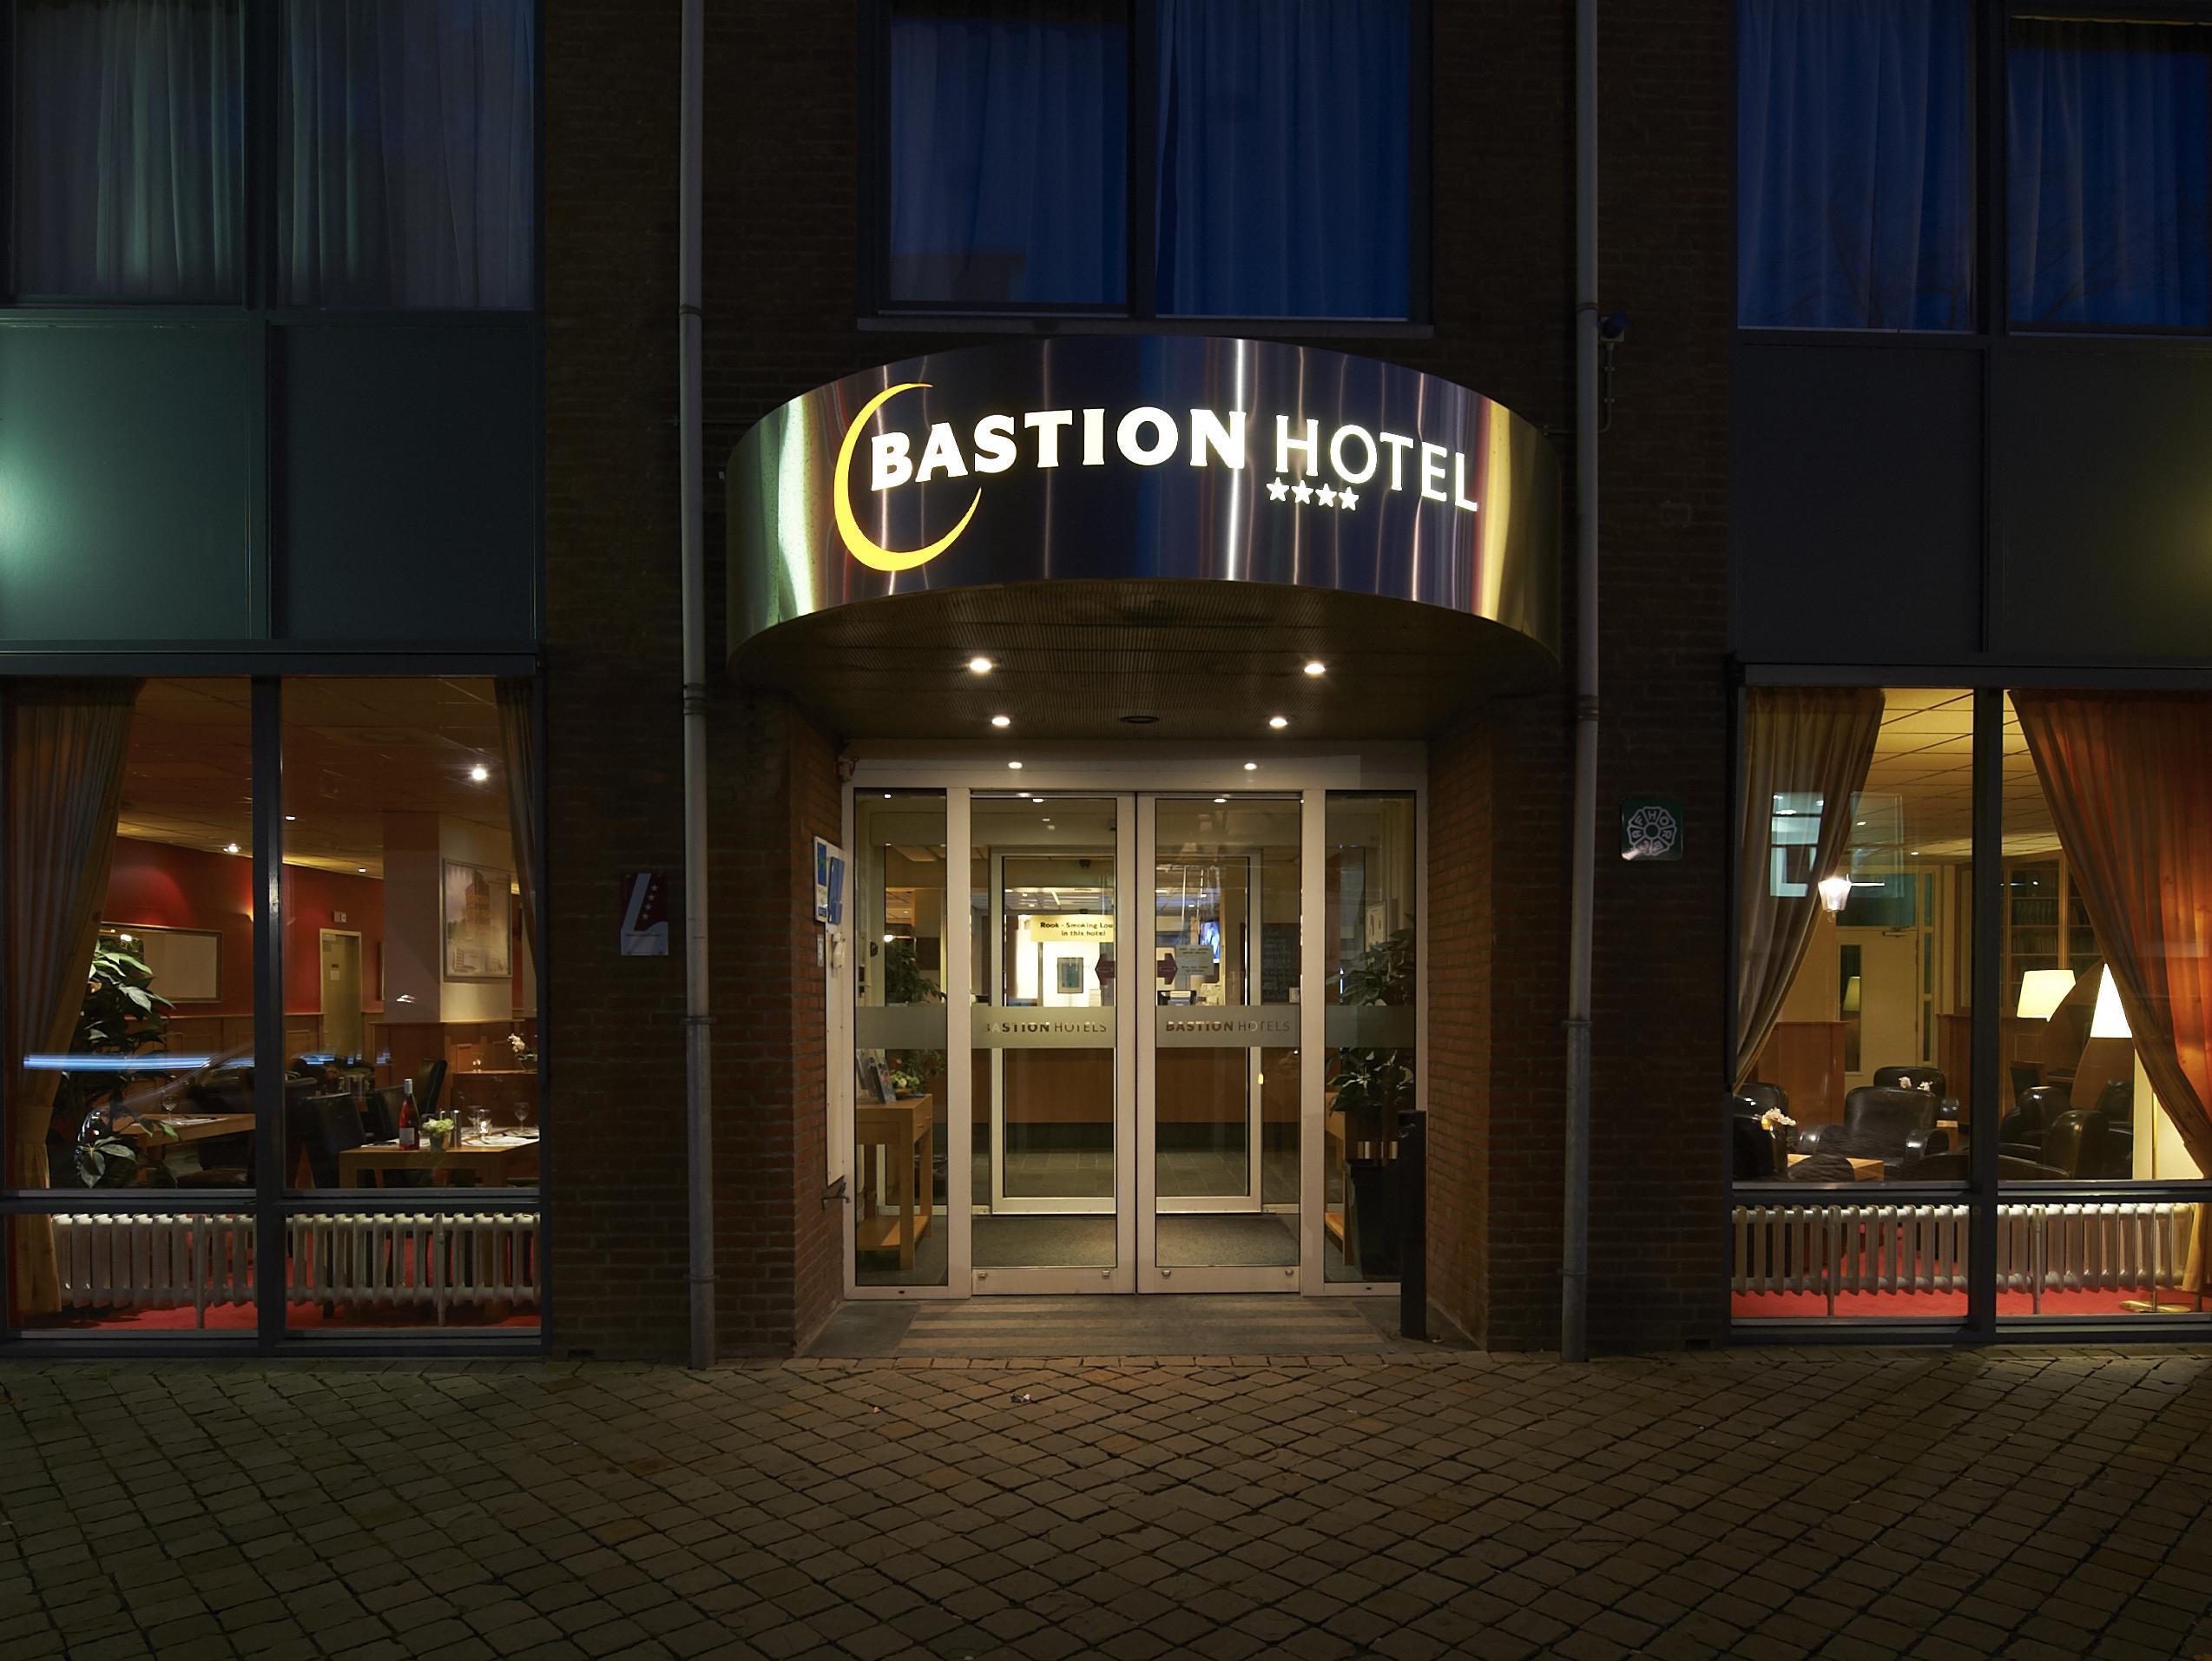 Bastion Hotel Maastricht Centrum Netherlands FAQ 2017, What facilities are there in Bastion Hotel Maastricht Centrum Netherlands 2017, What Languages Spoken are Supported in Bastion Hotel Maastricht Centrum Netherlands 2017, Which payment cards are accepted in Bastion Hotel Maastricht Centrum Netherlands , Netherlands Bastion Hotel Maastricht Centrum room facilities and services Q&A 2017, Netherlands Bastion Hotel Maastricht Centrum online booking services 2017, Netherlands Bastion Hotel Maastricht Centrum address 2017, Netherlands Bastion Hotel Maastricht Centrum telephone number 2017,Netherlands Bastion Hotel Maastricht Centrum map 2017, Netherlands Bastion Hotel Maastricht Centrum traffic guide 2017, how to go Netherlands Bastion Hotel Maastricht Centrum, Netherlands Bastion Hotel Maastricht Centrum booking online 2017, Netherlands Bastion Hotel Maastricht Centrum room types 2017.